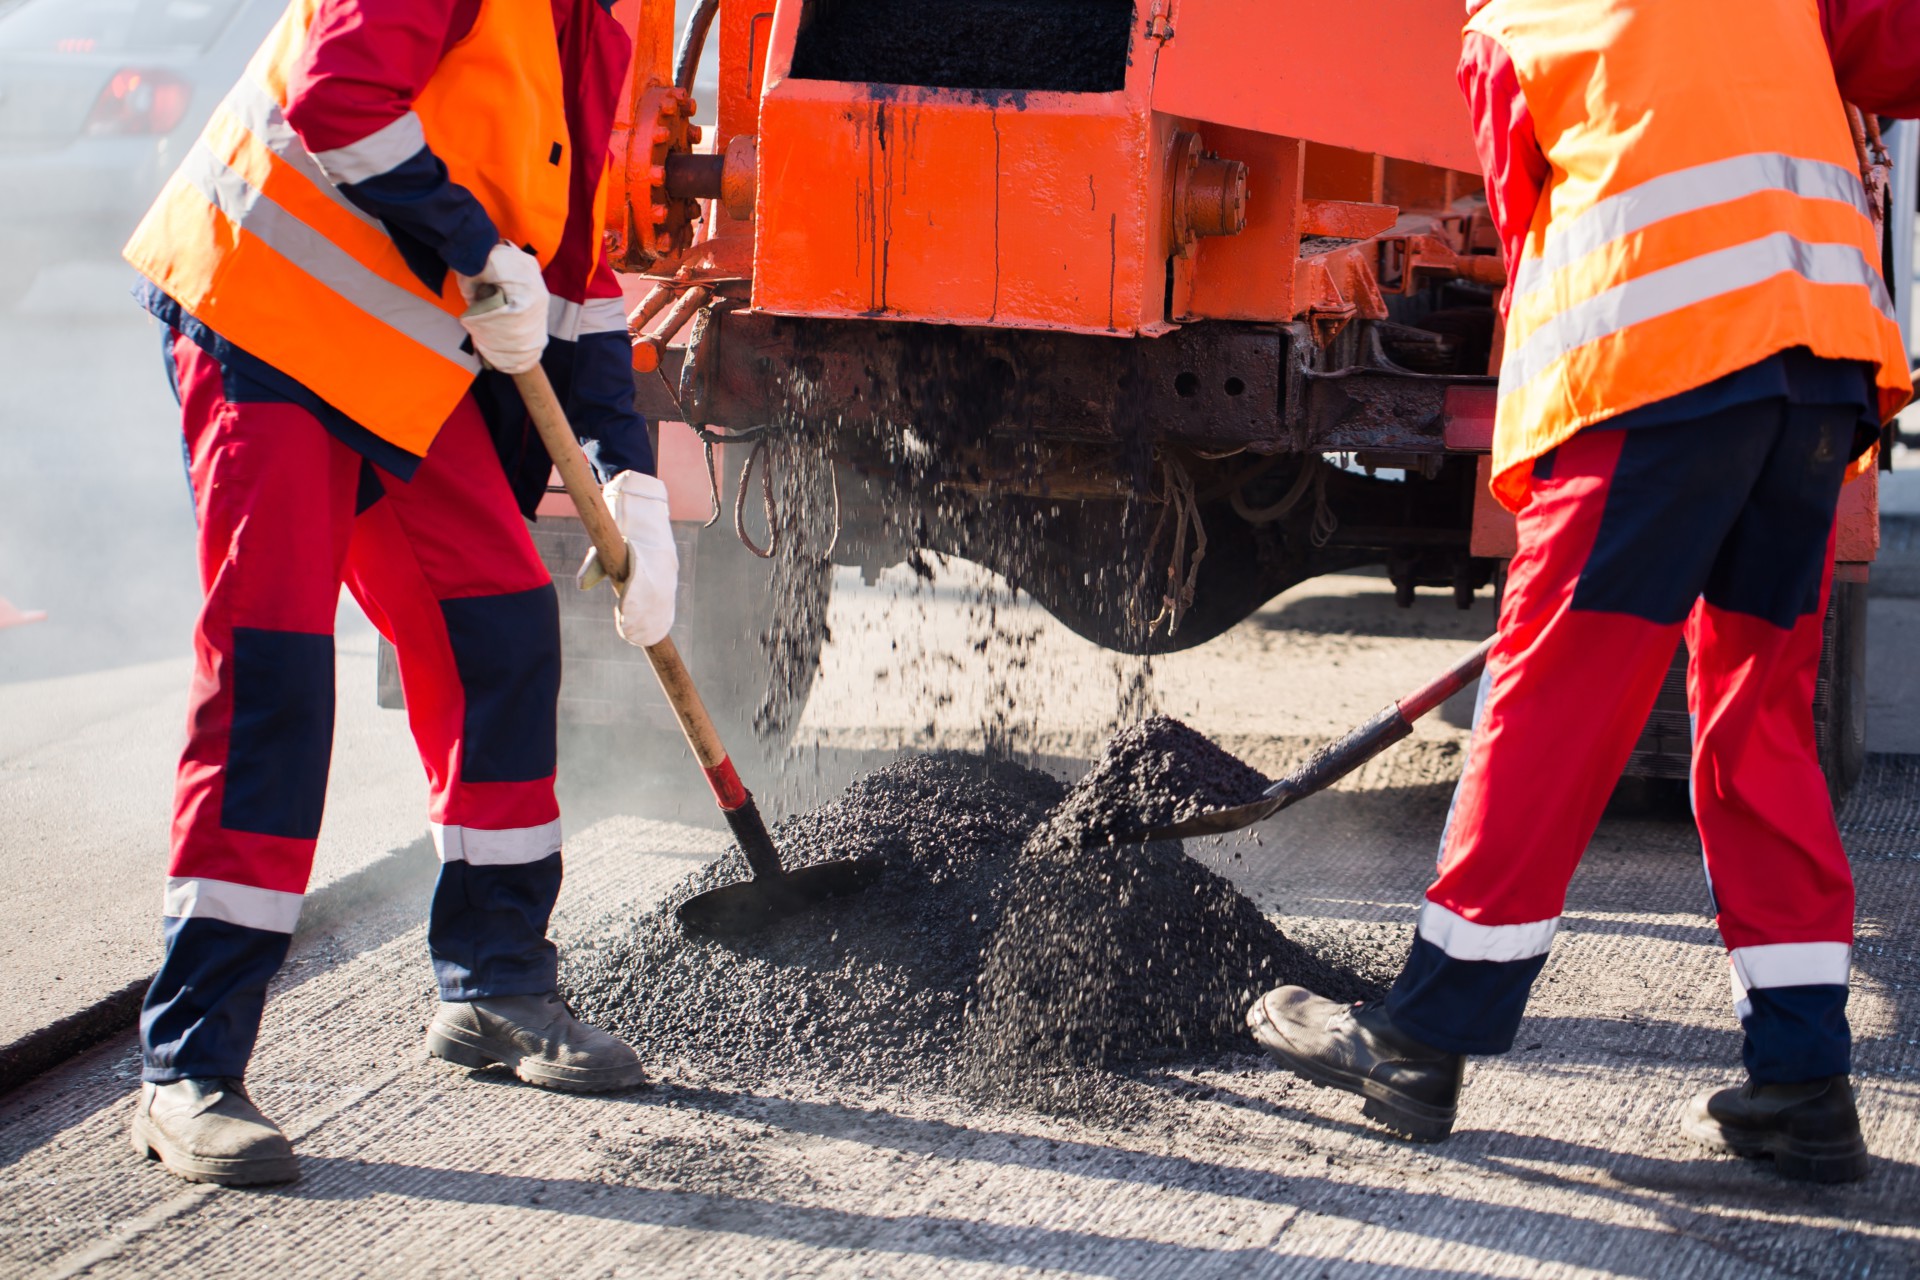 Road resurfacing scheme to commence in Pomeroy